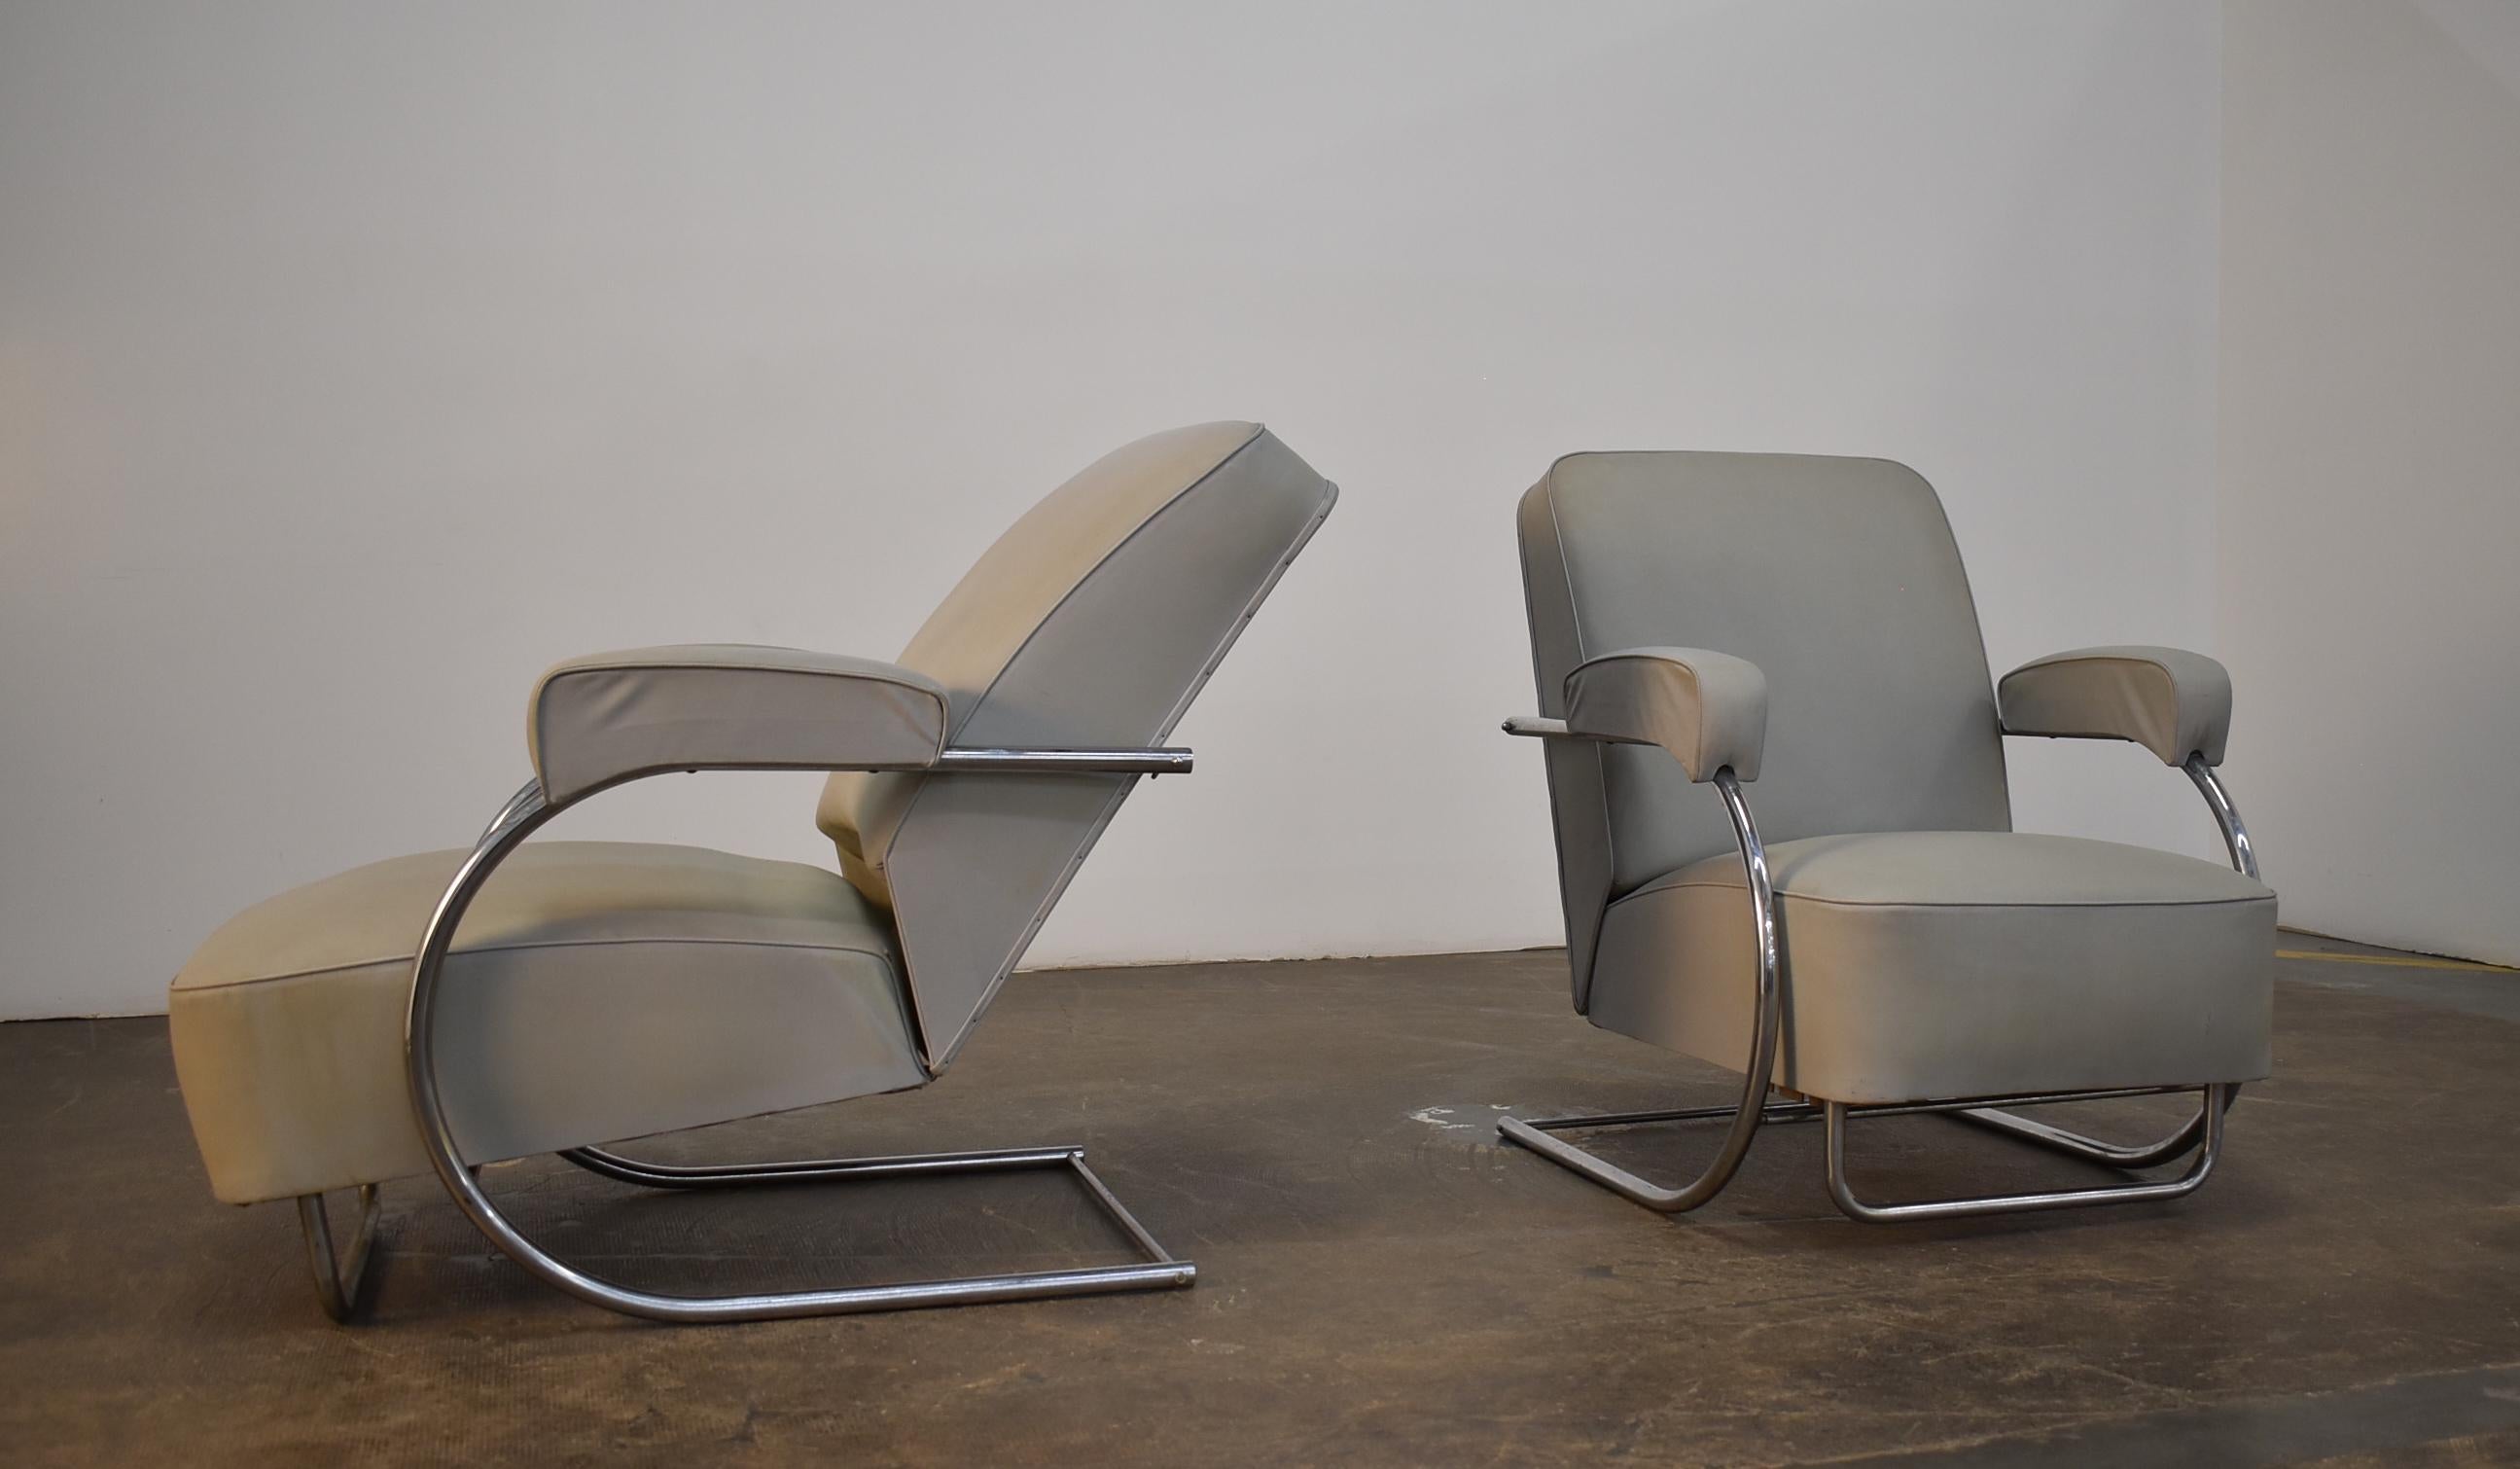 1930s French Art Deco Reclining Moleskin Chairs For Sale 1